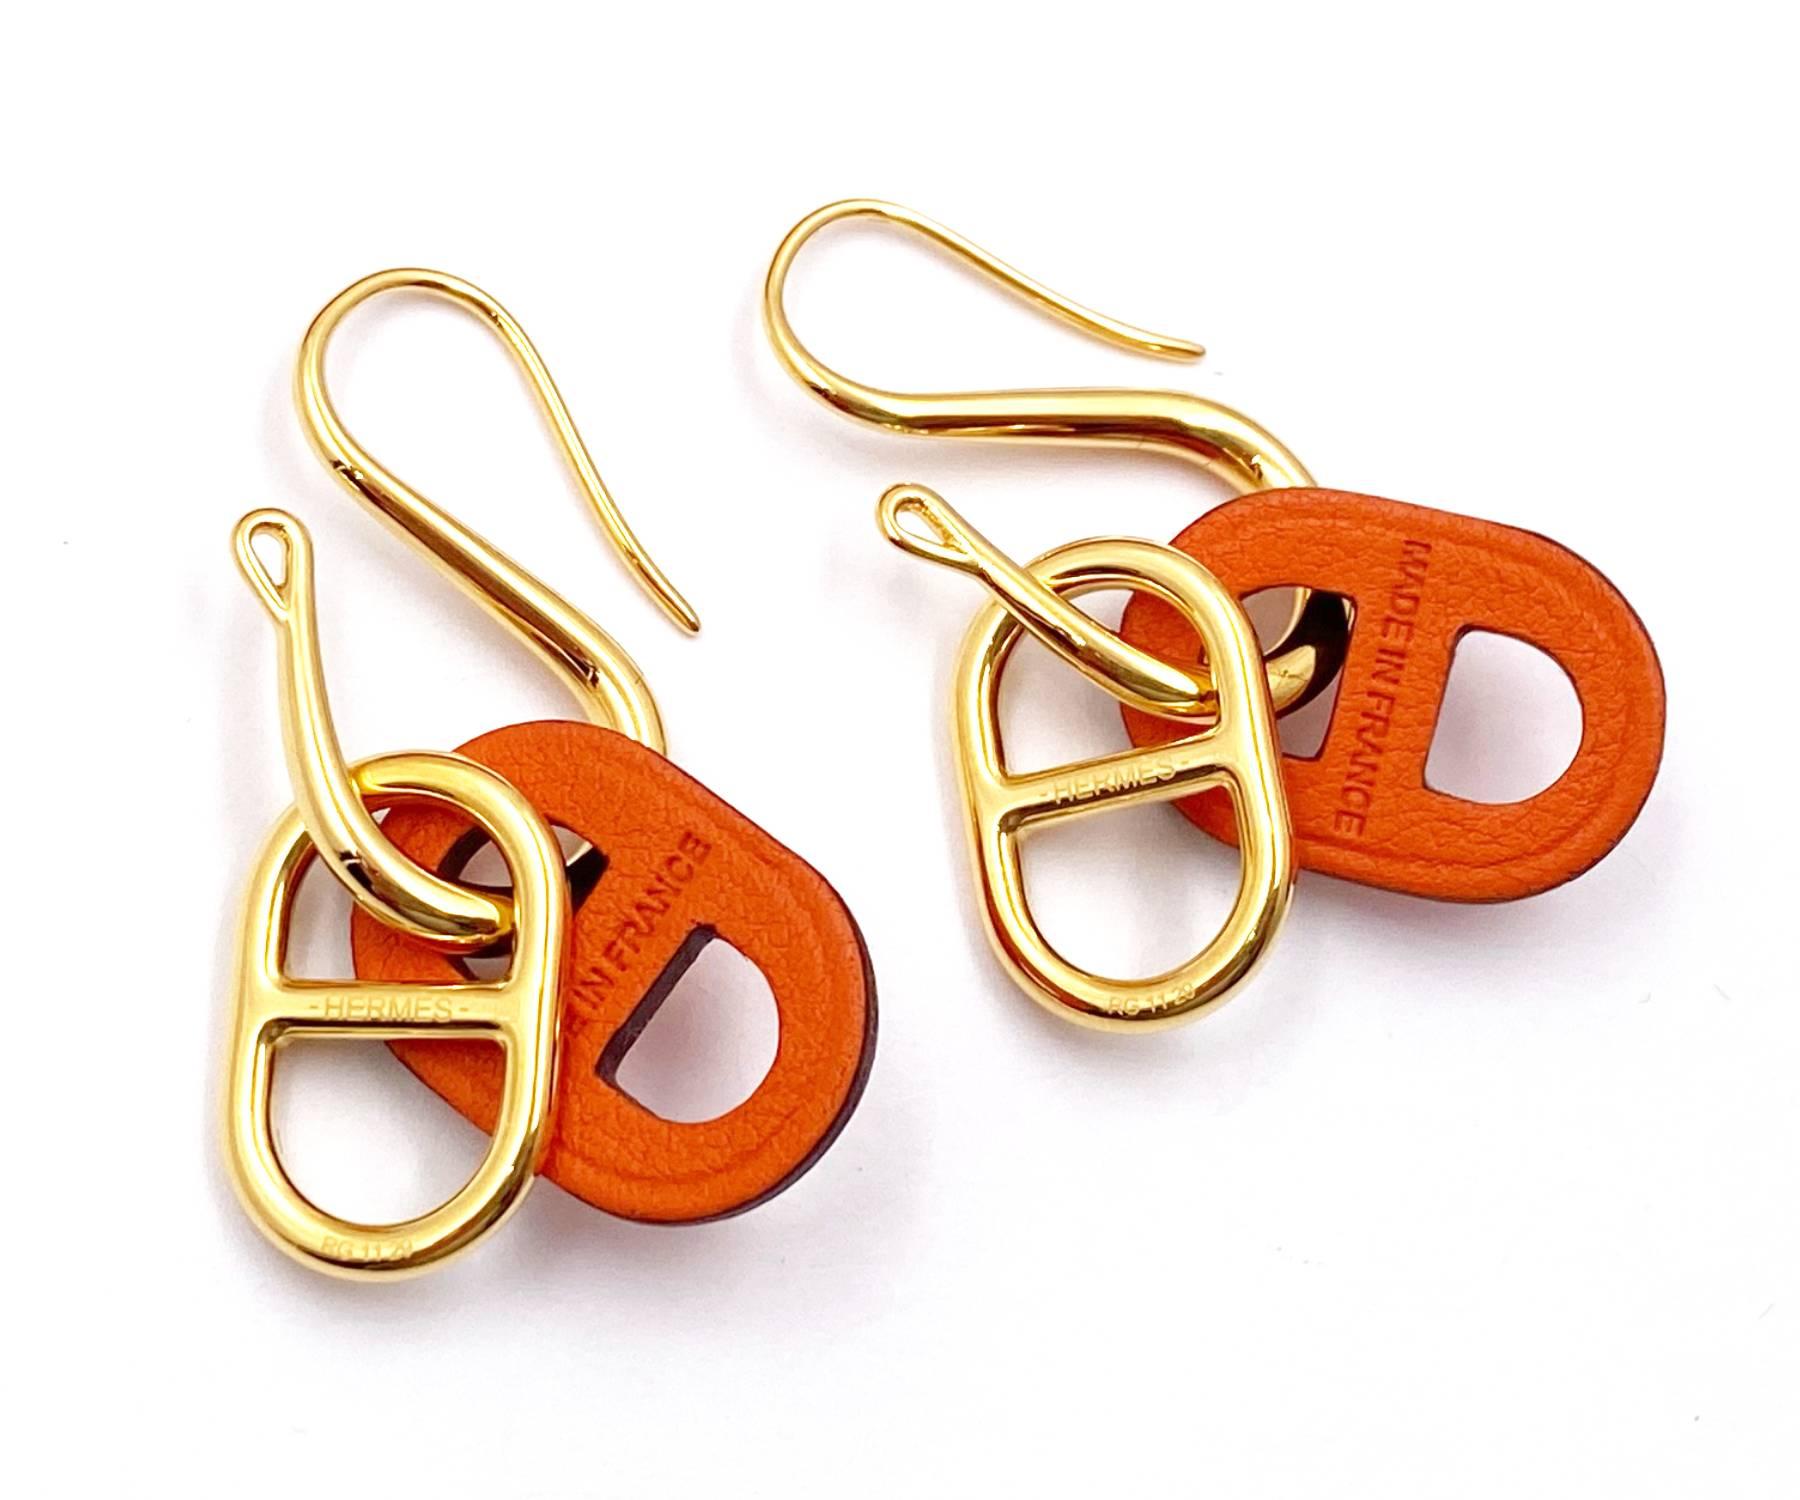 Hermes Brand New Gold Orange O’maillion 3 Ways Earrings

*Marked Hermes
*Made in France
*Comes with original box and ribbon
*Brand New with defect

-Approximately 1.6″ x 0.5″
-There are 2 pin-sized marks on the earrings.

17124-5251